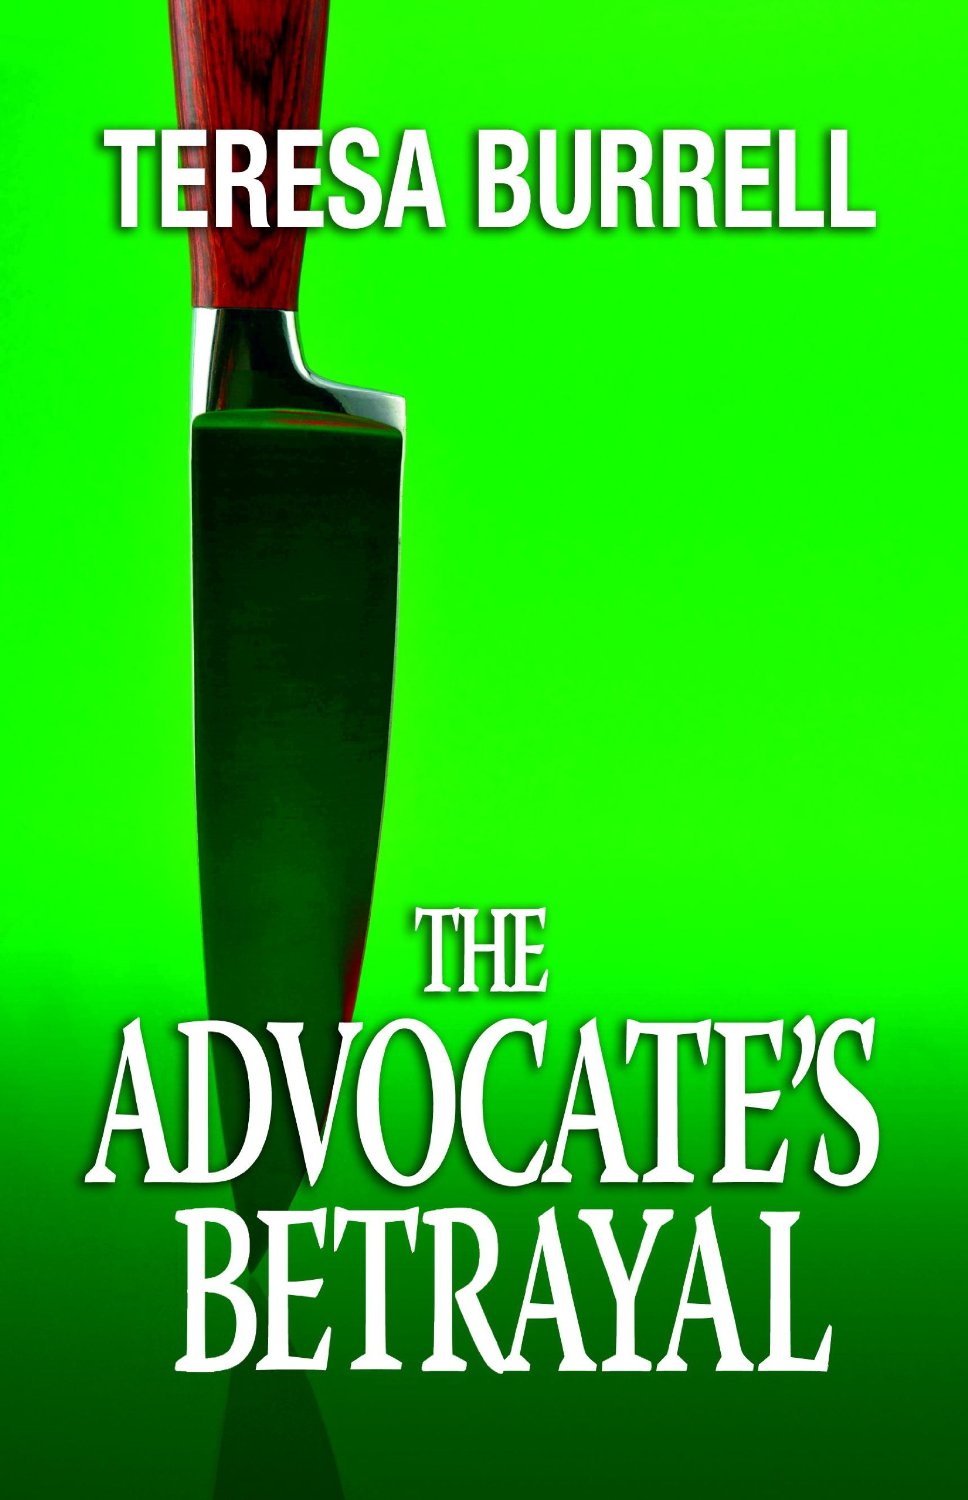 The Advocate’s Betrayal (The Advocate Series Book 2) by Teresa Burrell